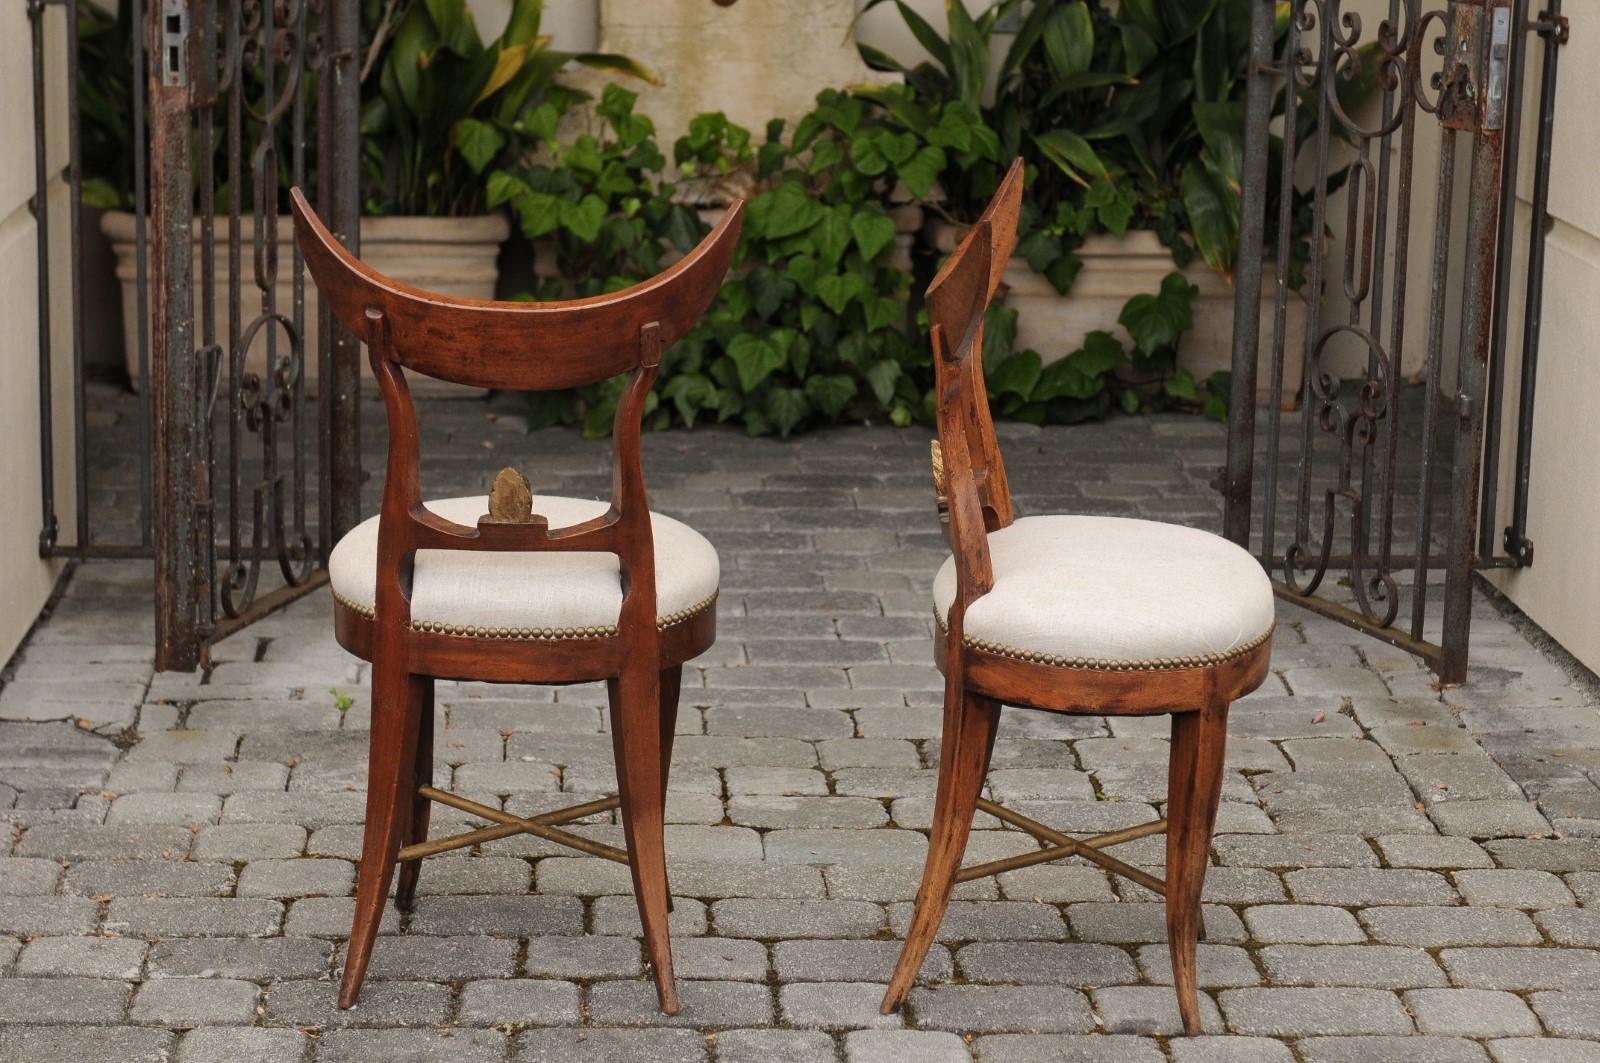 Pair of Italian 1860s Upholstered Side Chairs with Crescent Backs and Saber Legs For Sale 6